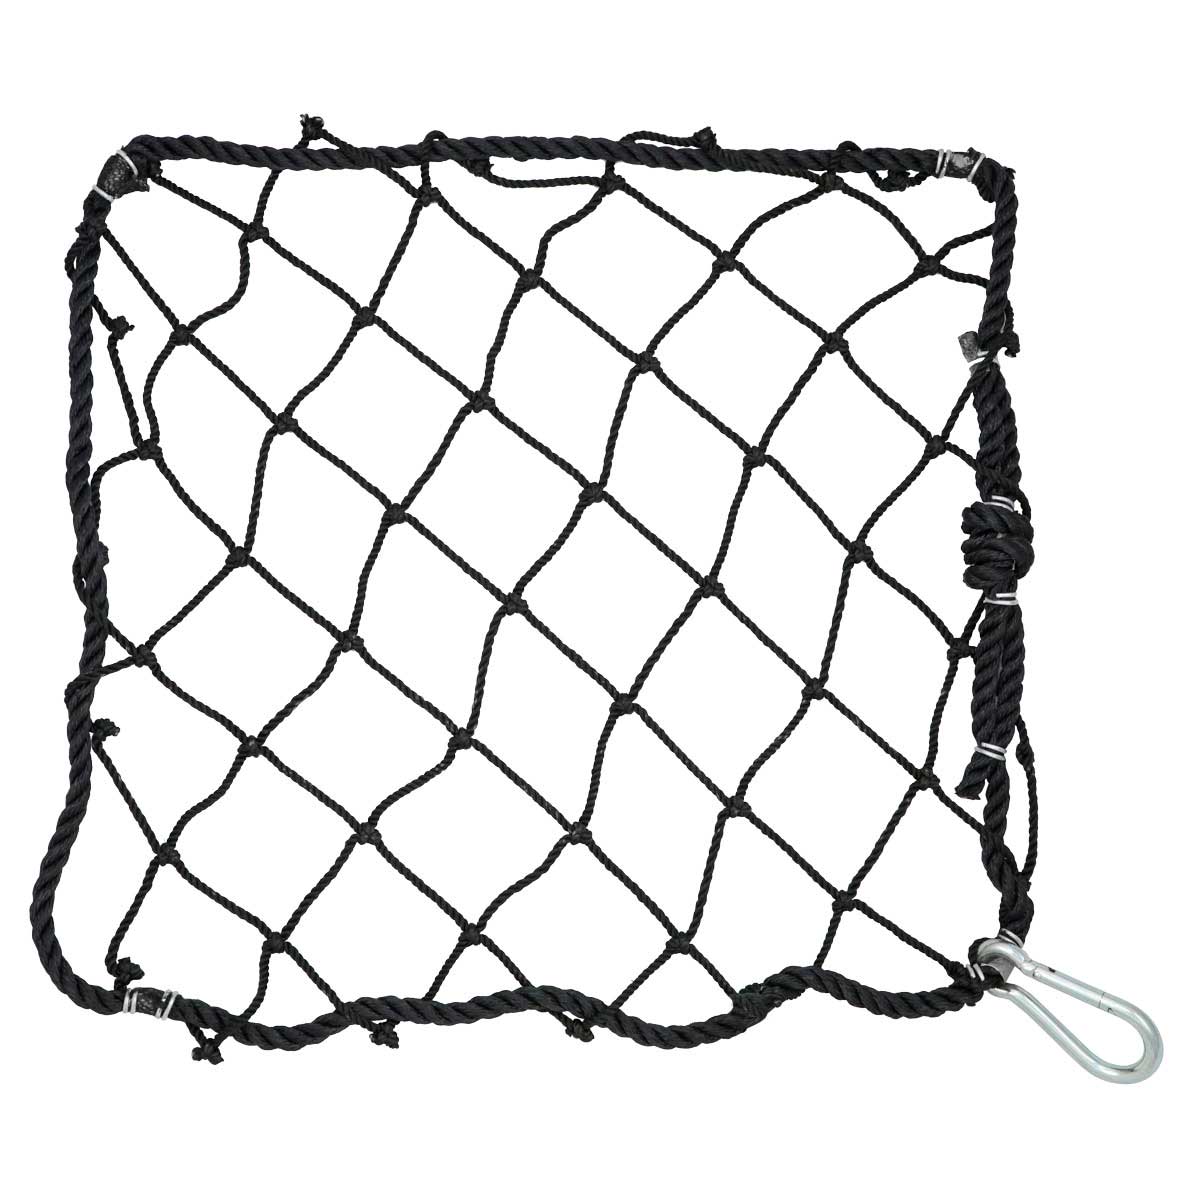 Net Mesh Bag  Safety and Mobility